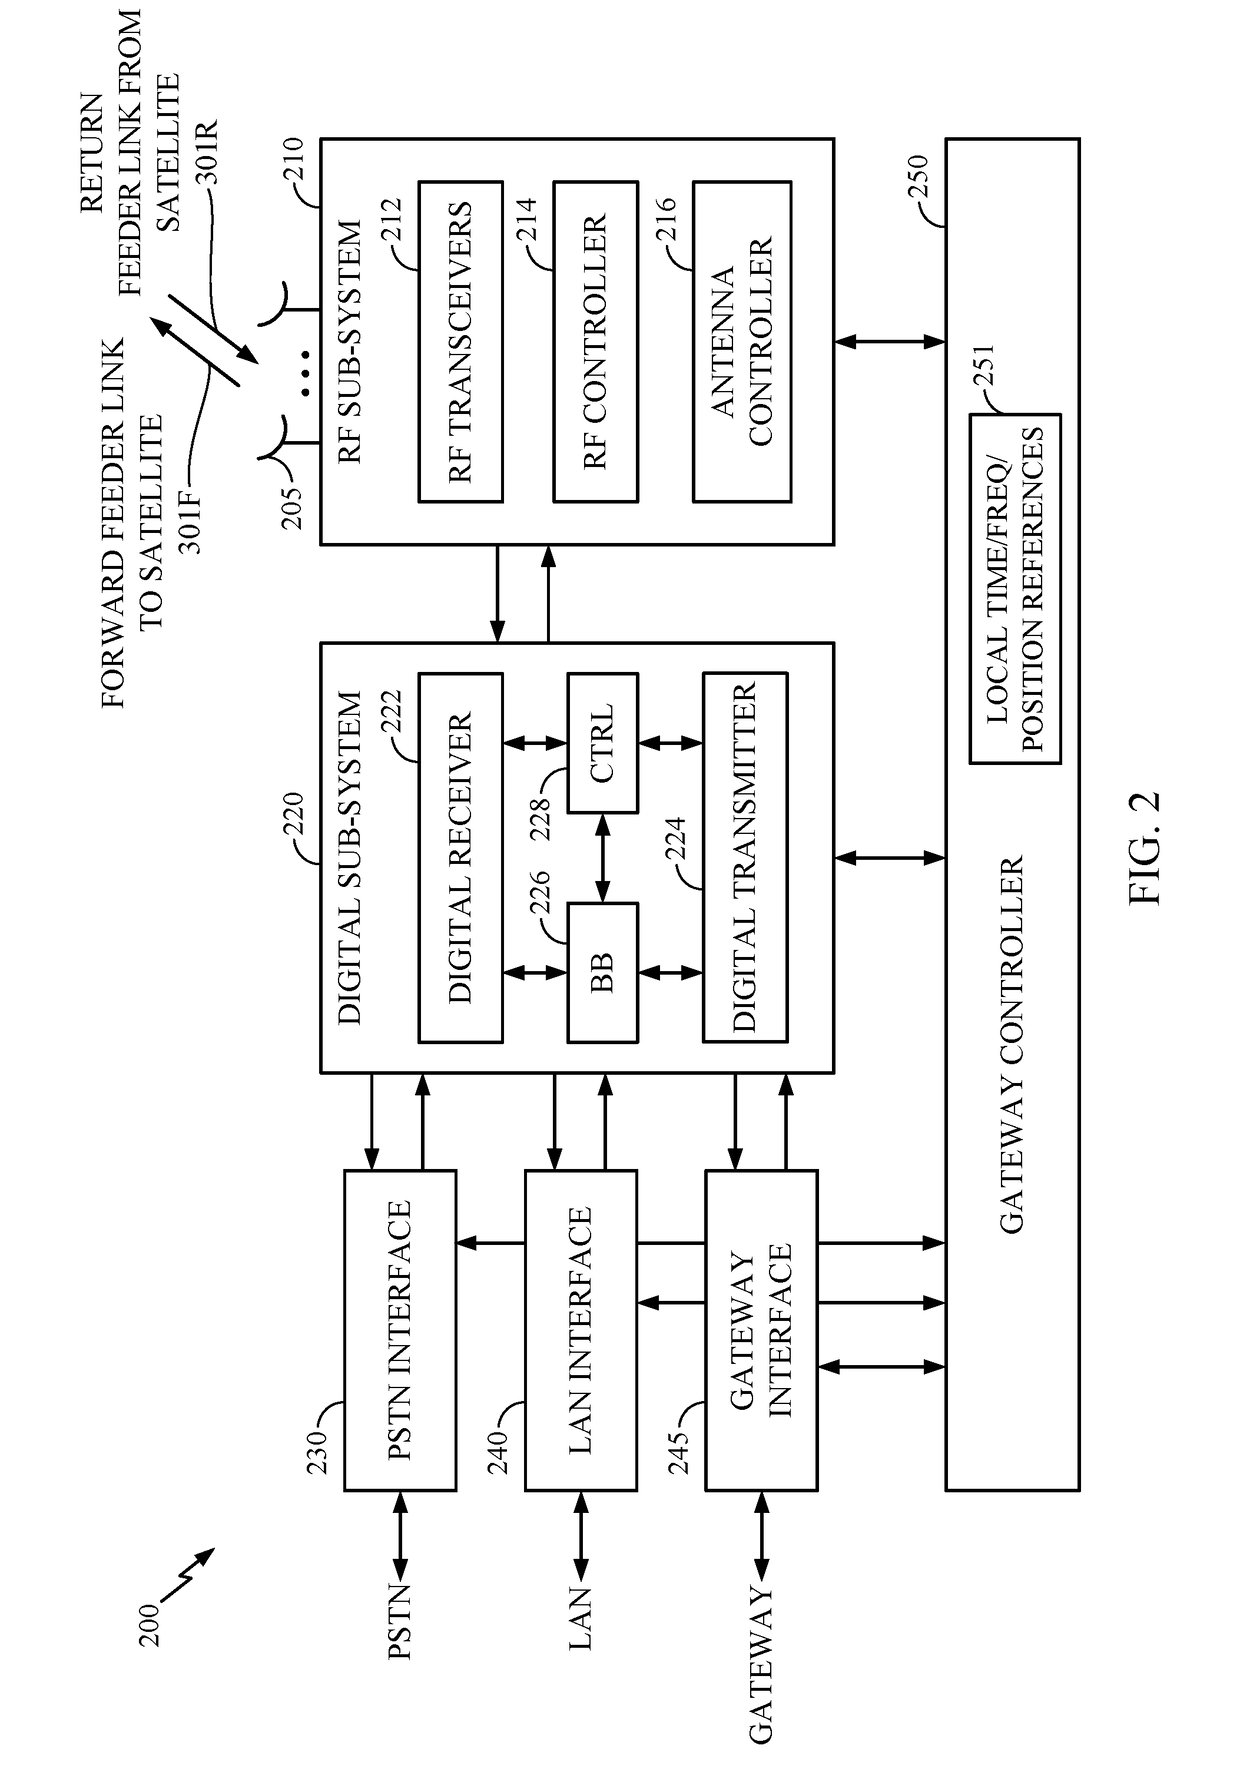 Method and apparatus for inter-satellite handovers in low-earth orbit (LEO) satellite systems